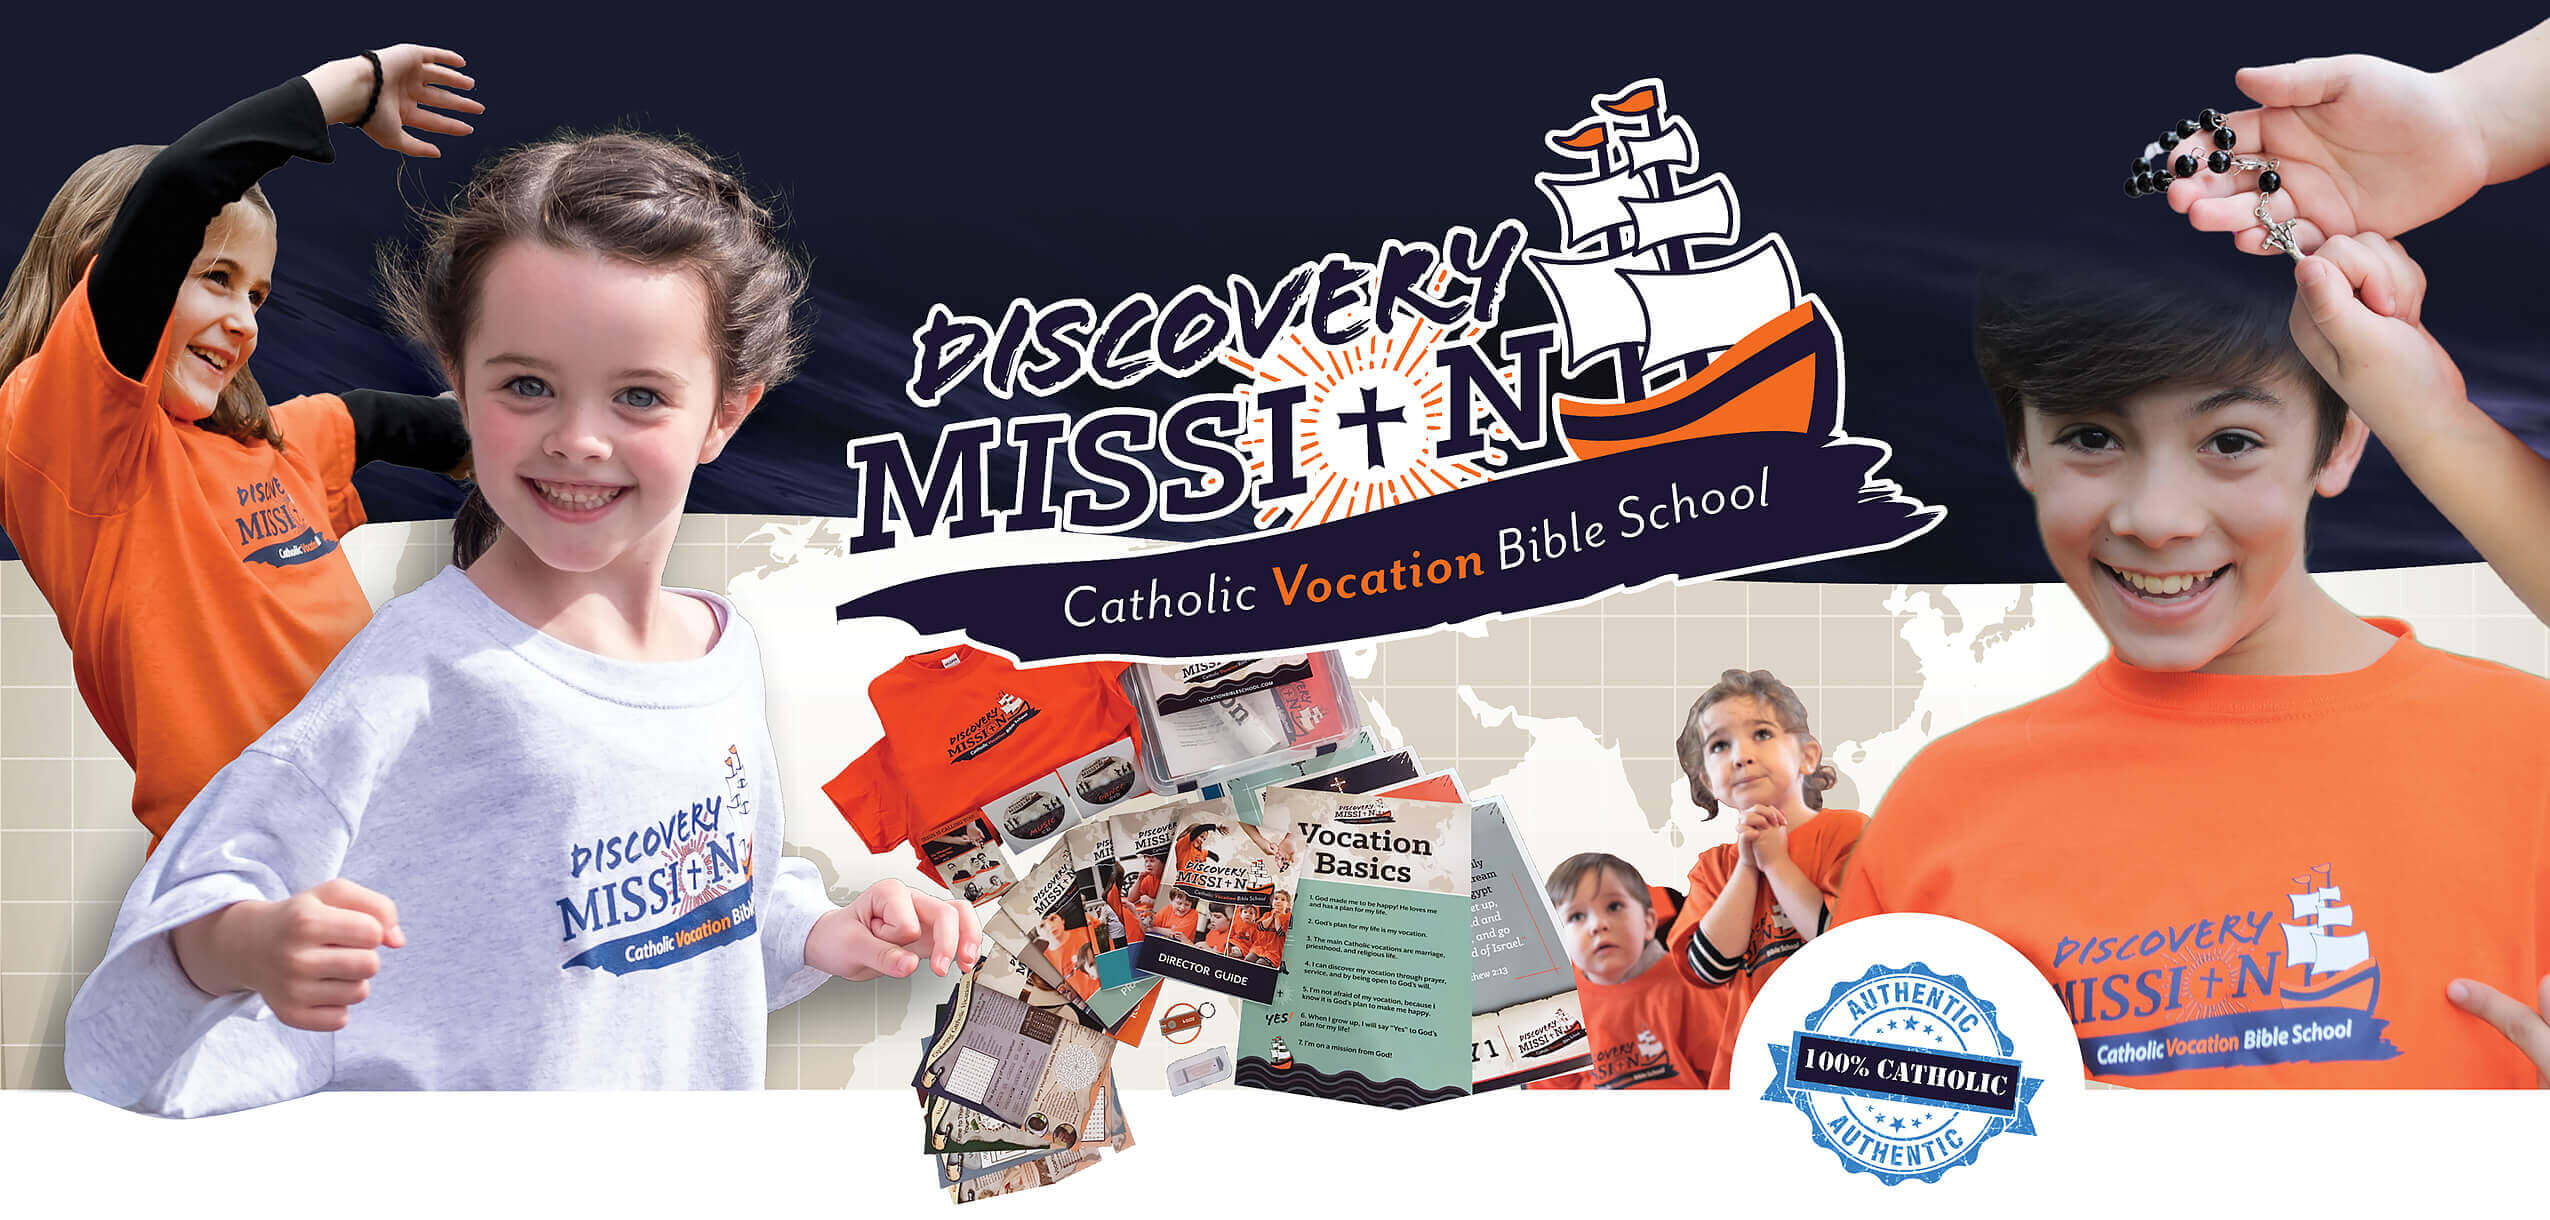 Discovery Mission Vocation Bible School